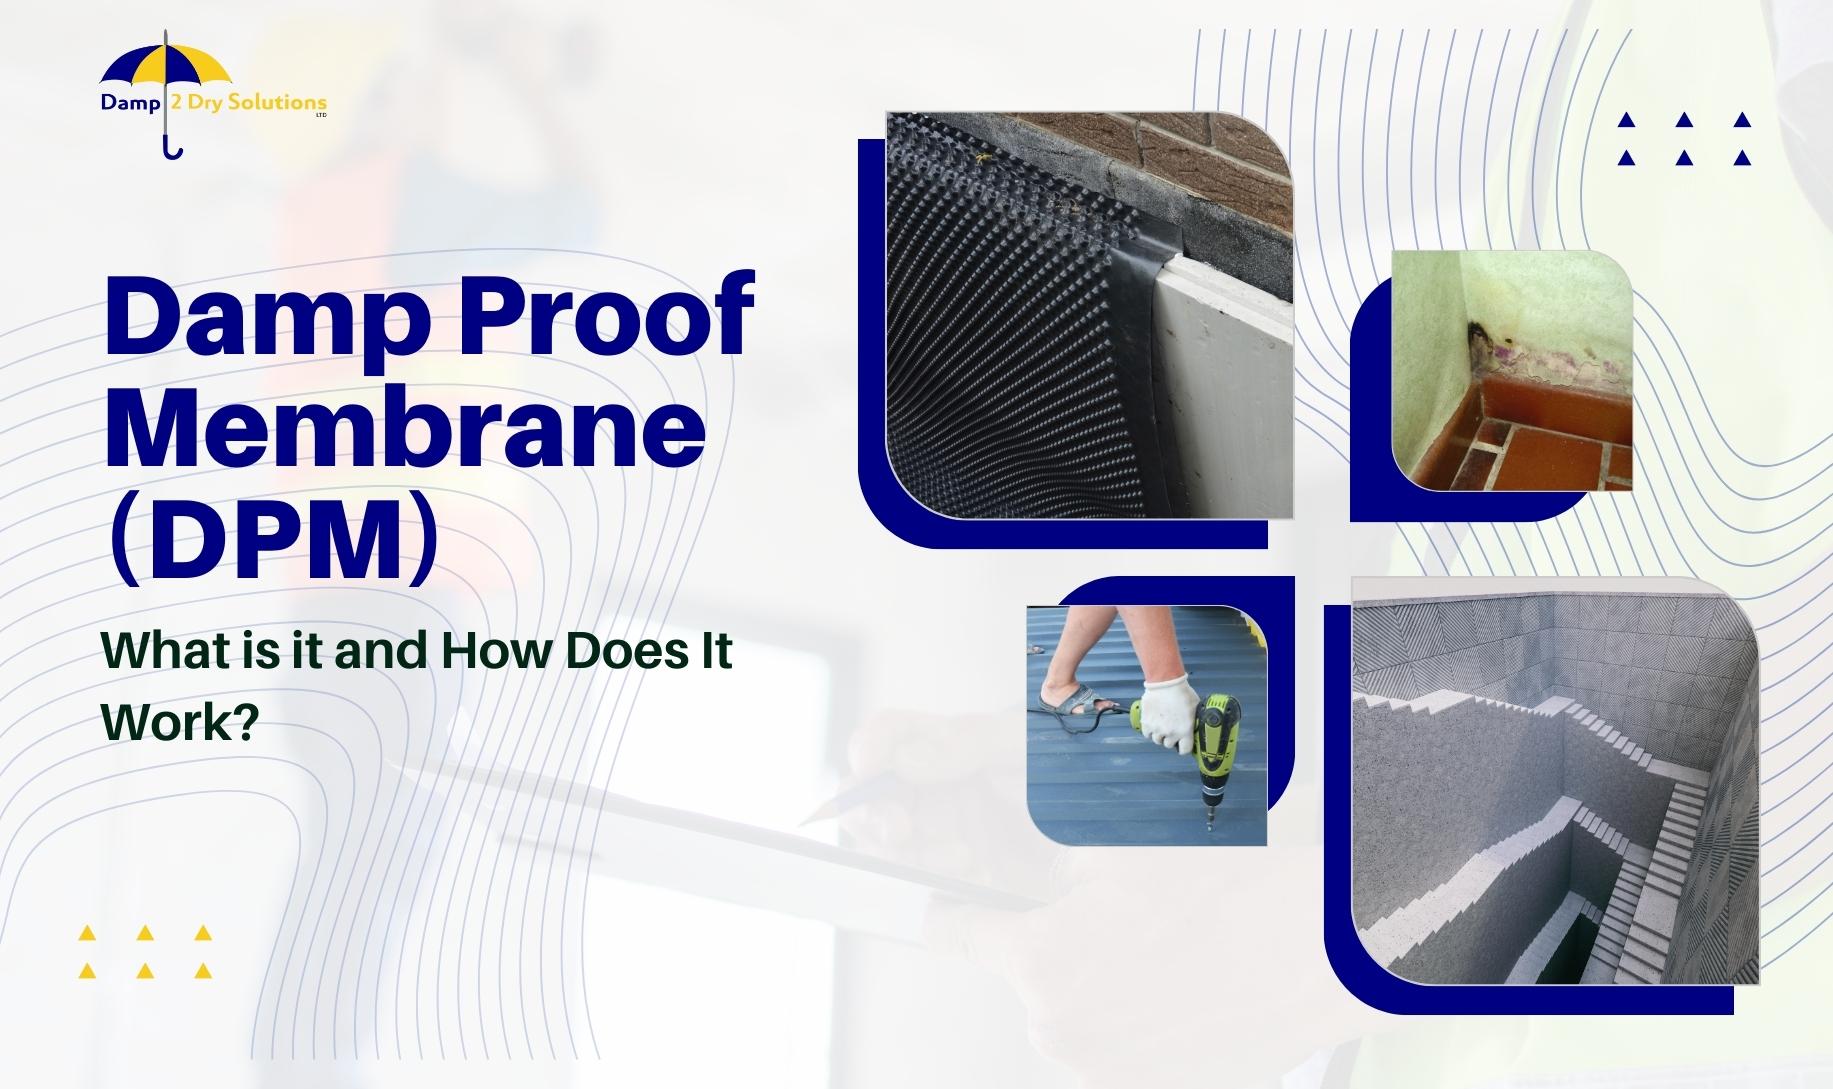 What is a Damp Proof Membrane and How Does It Work?